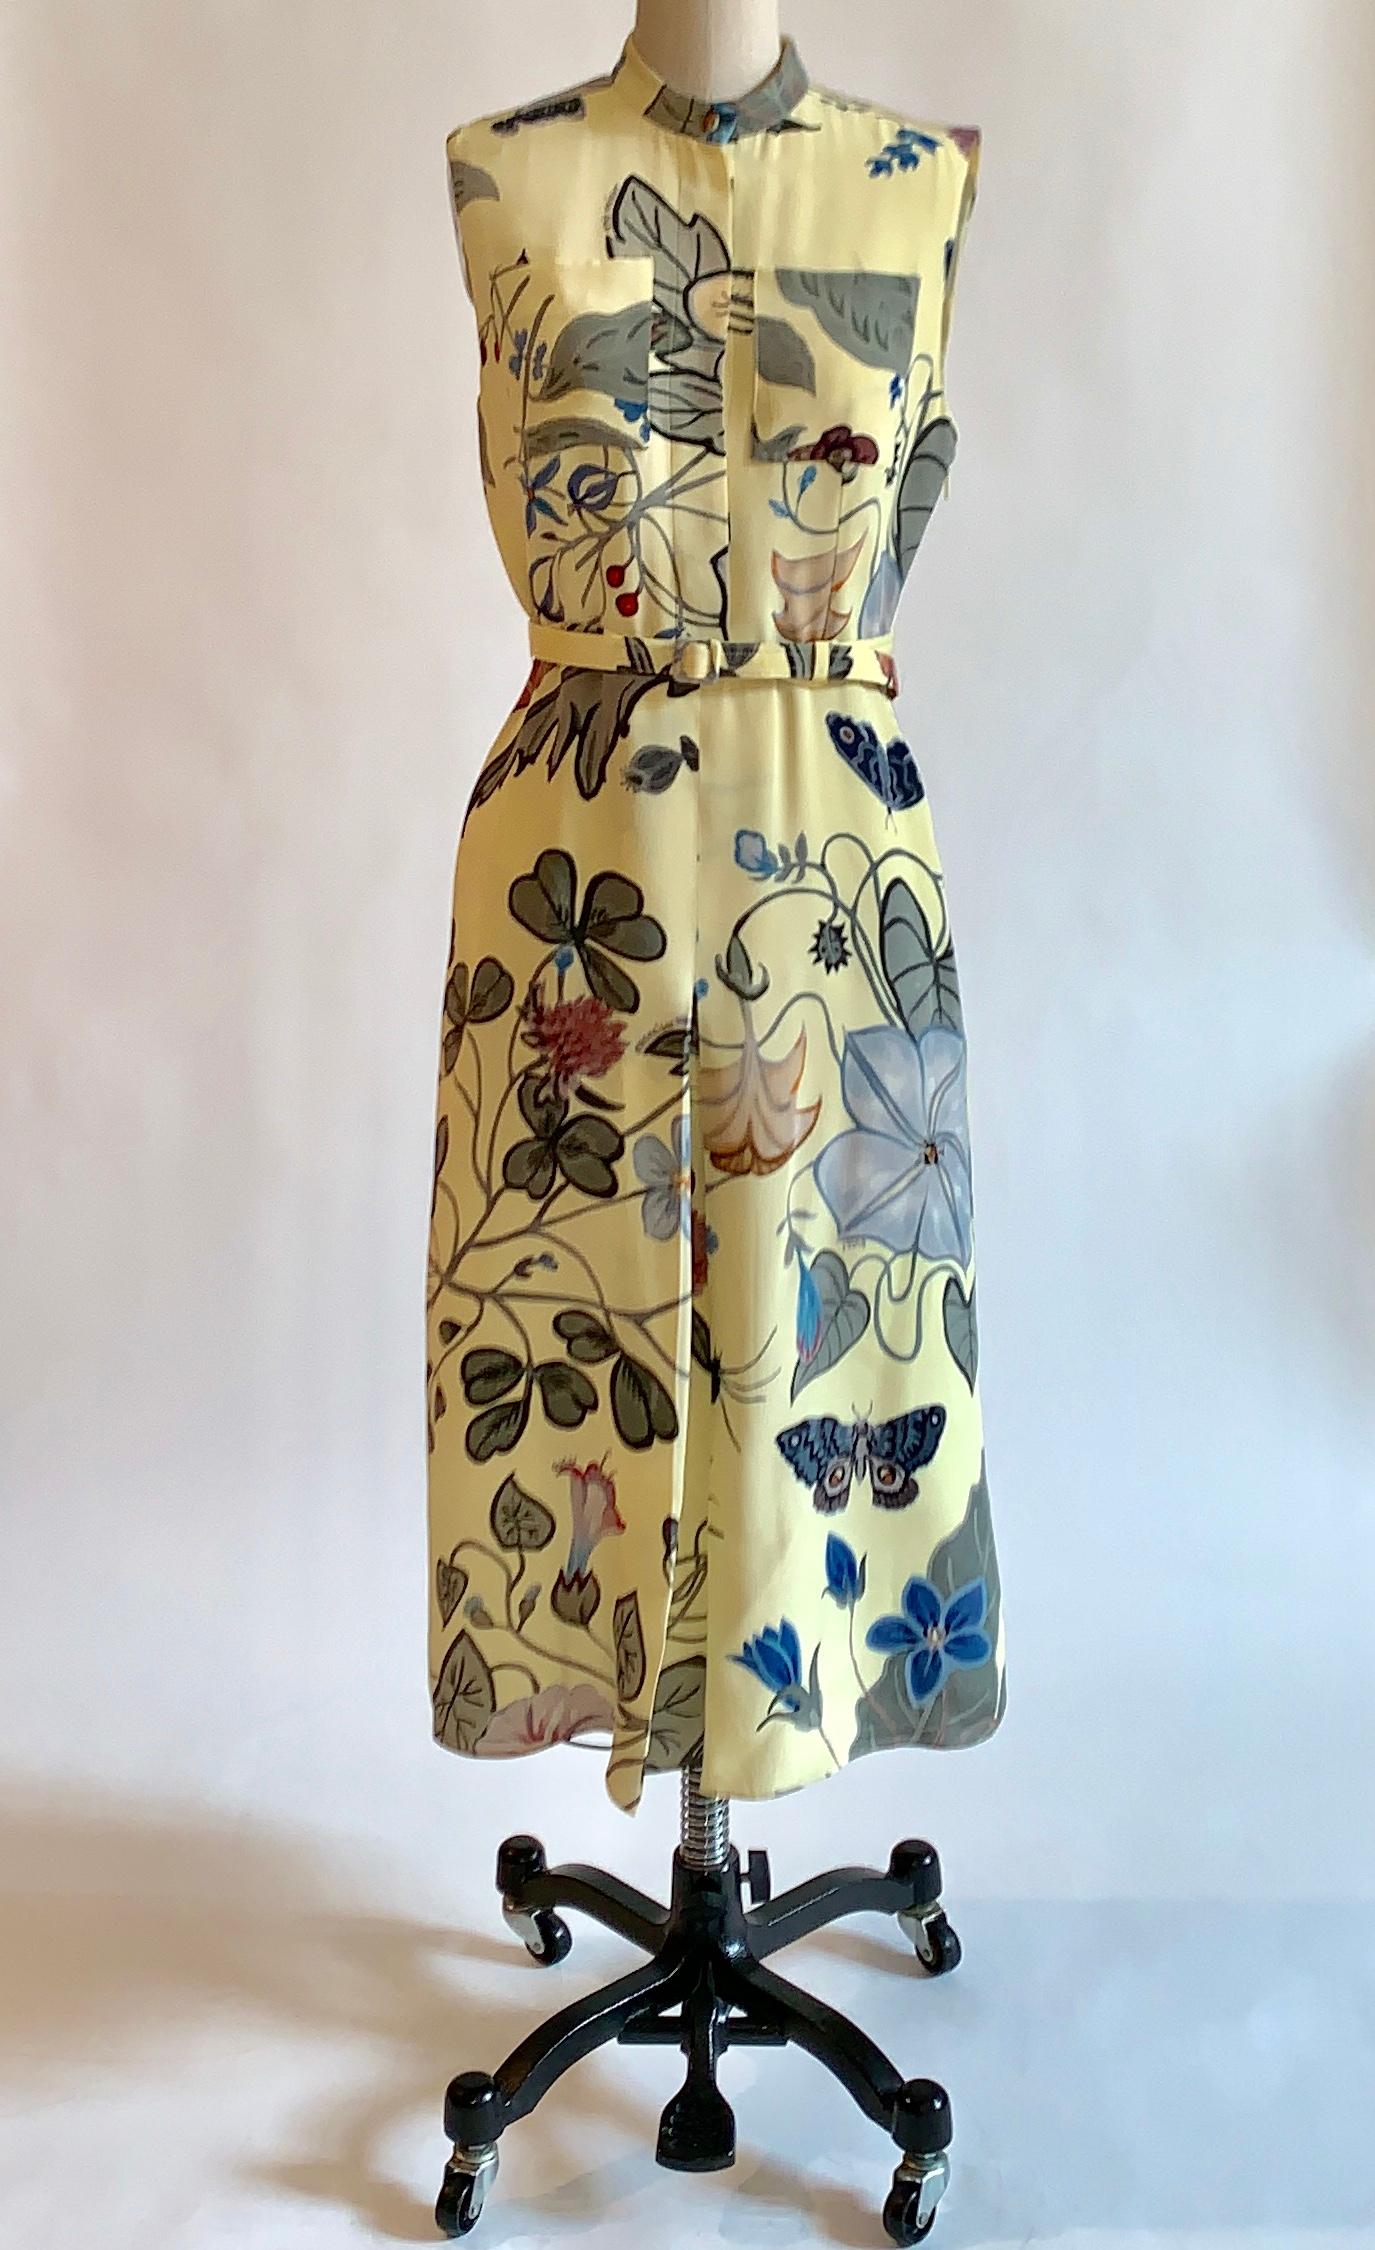 Yellow silk Gucci floral dress featuring artist Kris Knight's re-imagination of the iconic Gucci flora print. Print features insects and plants associated with ancient pagan Rome, is signed 'Kris Knight' and 'Gucci' throughout. Patch pockets at